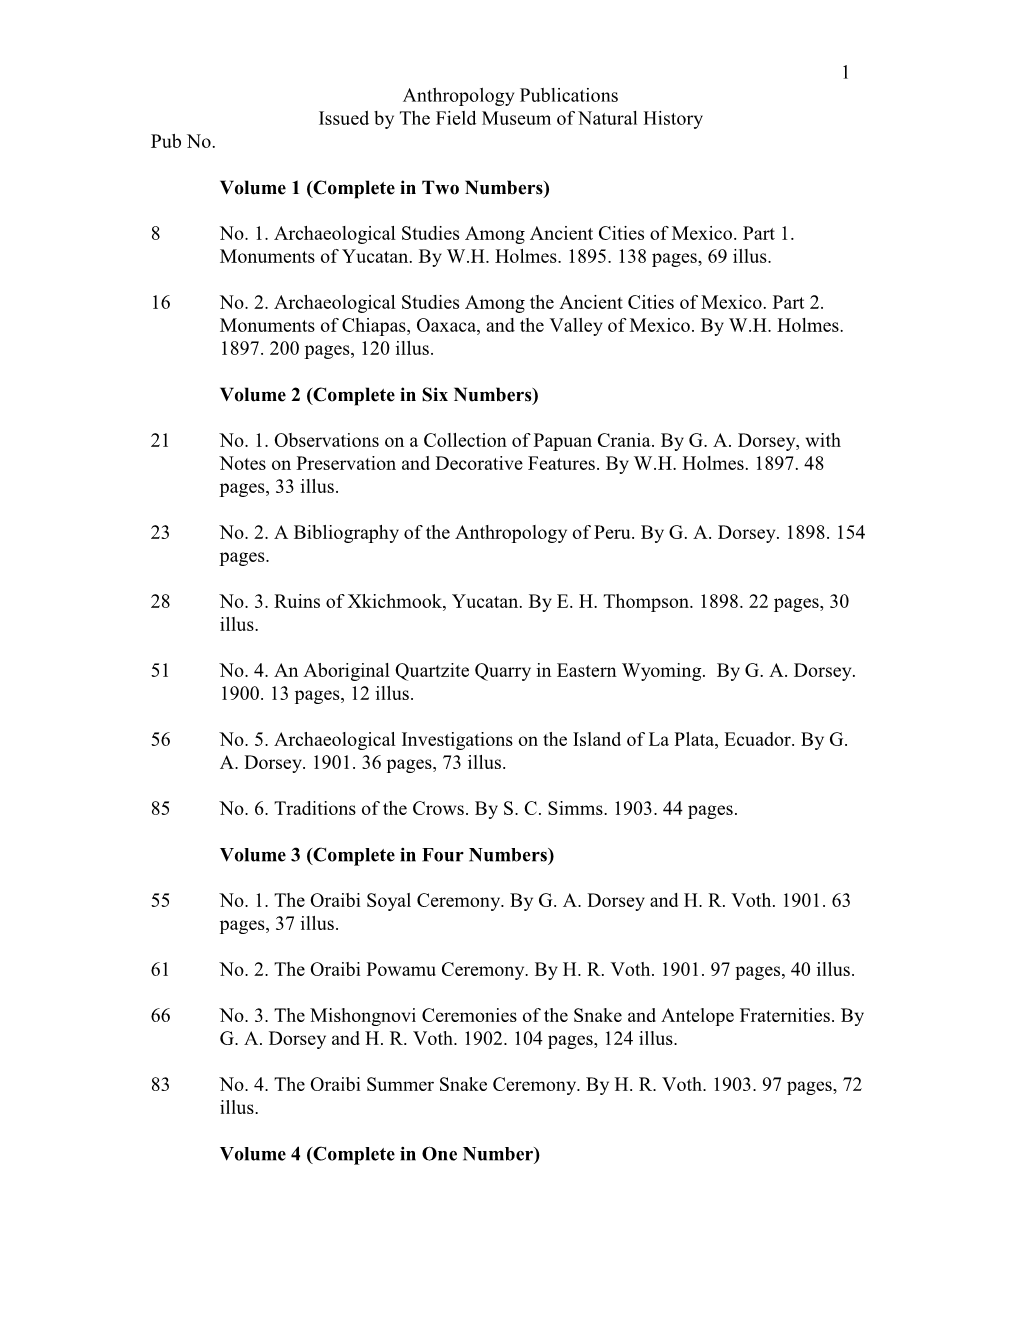 Anthropology Publications Issued by the Field Museum of Natural History Pub No